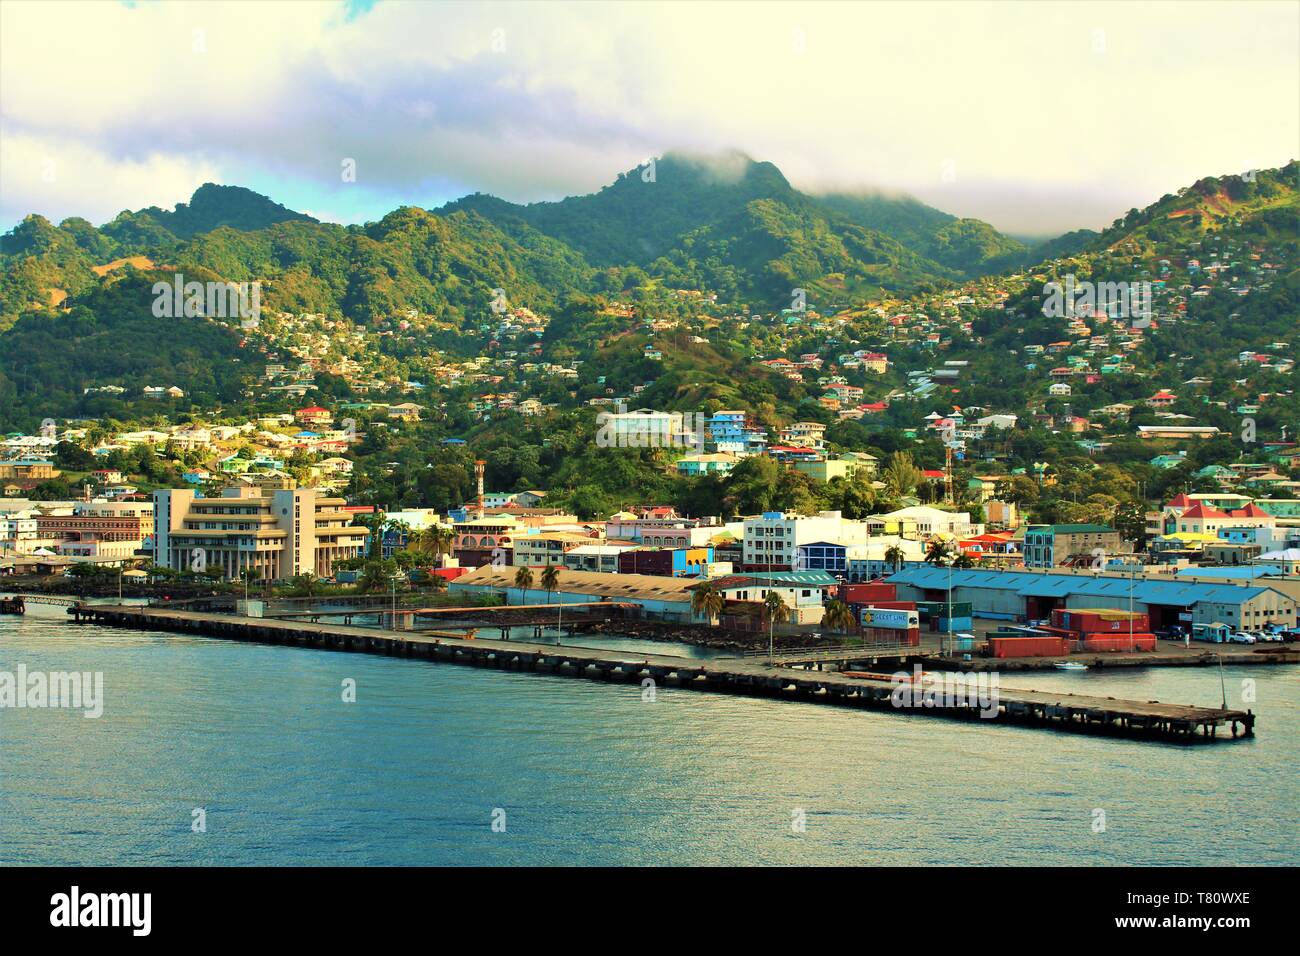 A view across the port and town of Kingstown, the capital of the Caribbean island of St Vincent. Shot taken from the top of a cruise ship in port. Stock Photo